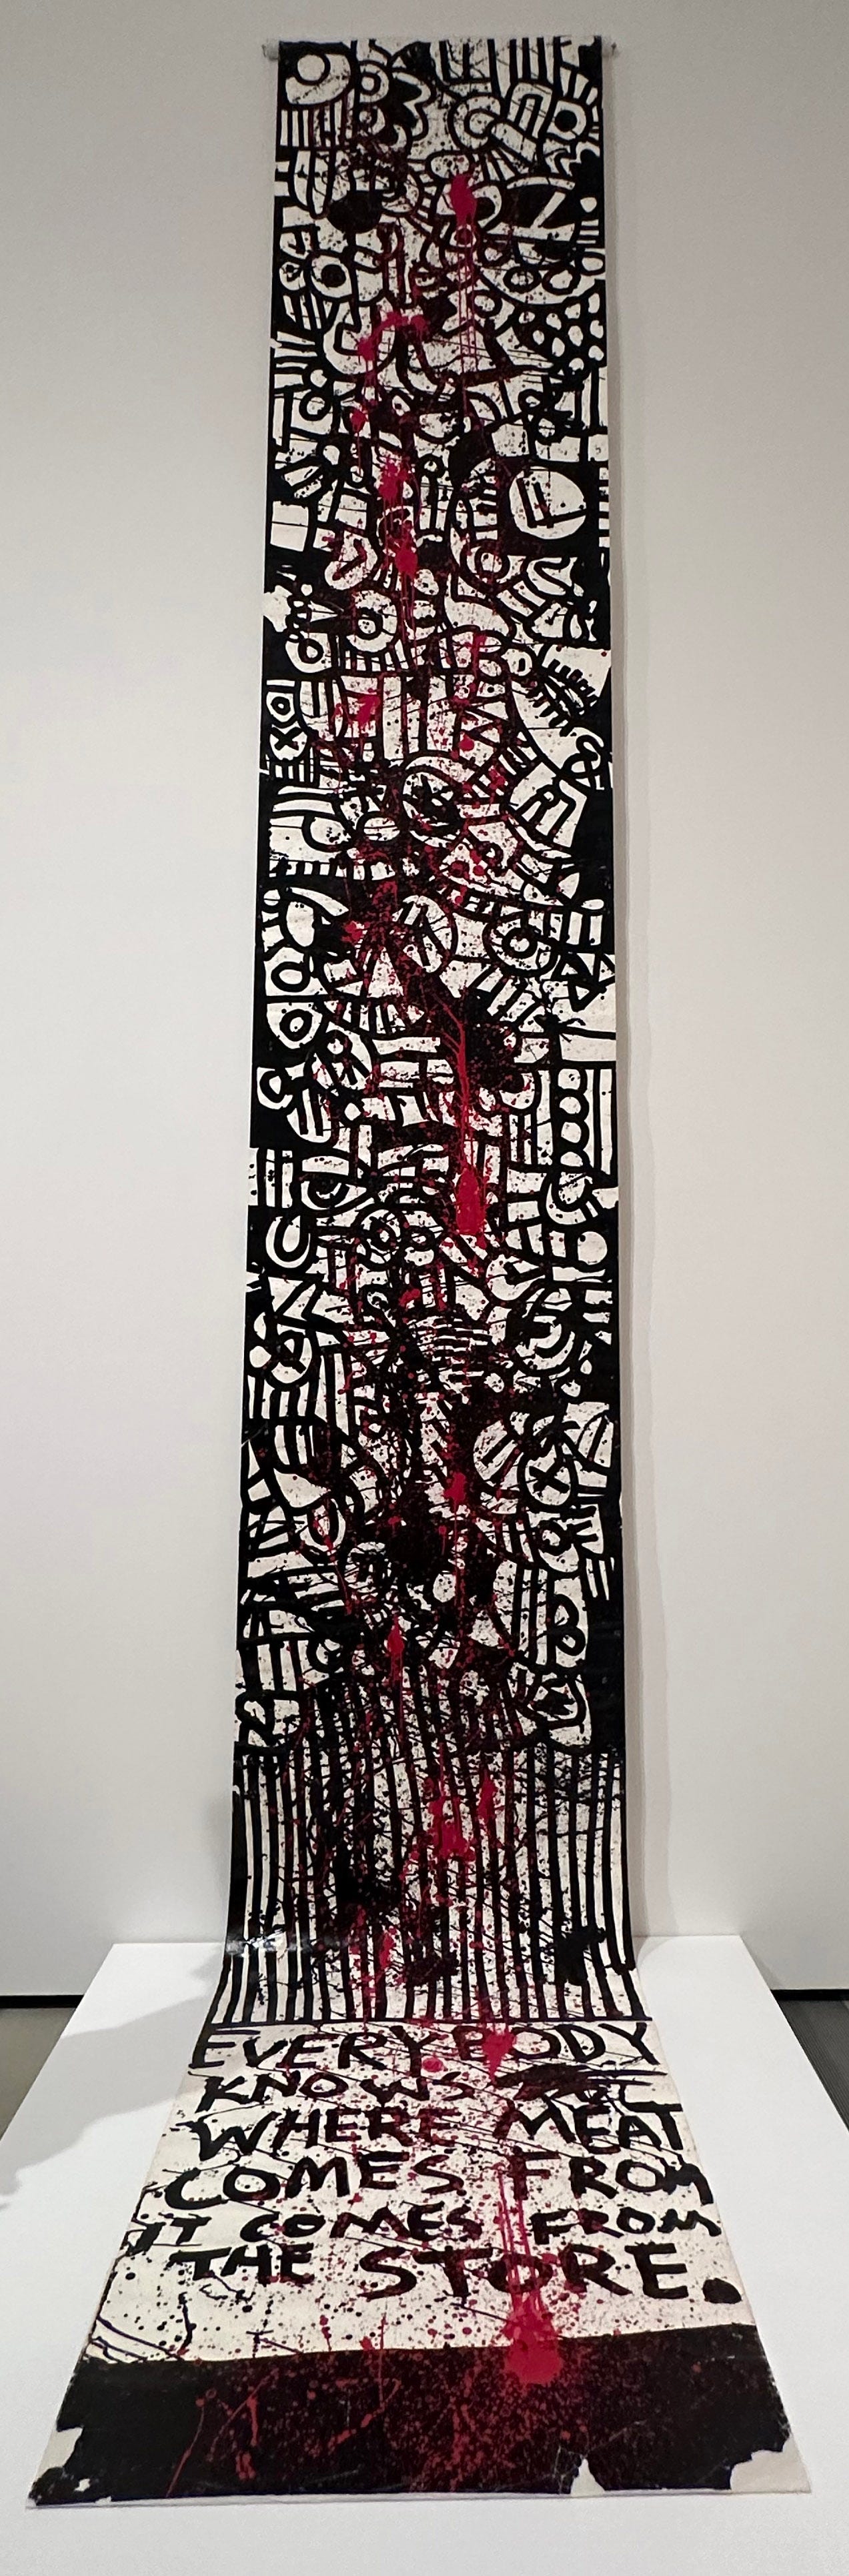 Keith Haring: Art Is for Everybody, by Nicholas B. Cipolla, CultureTech